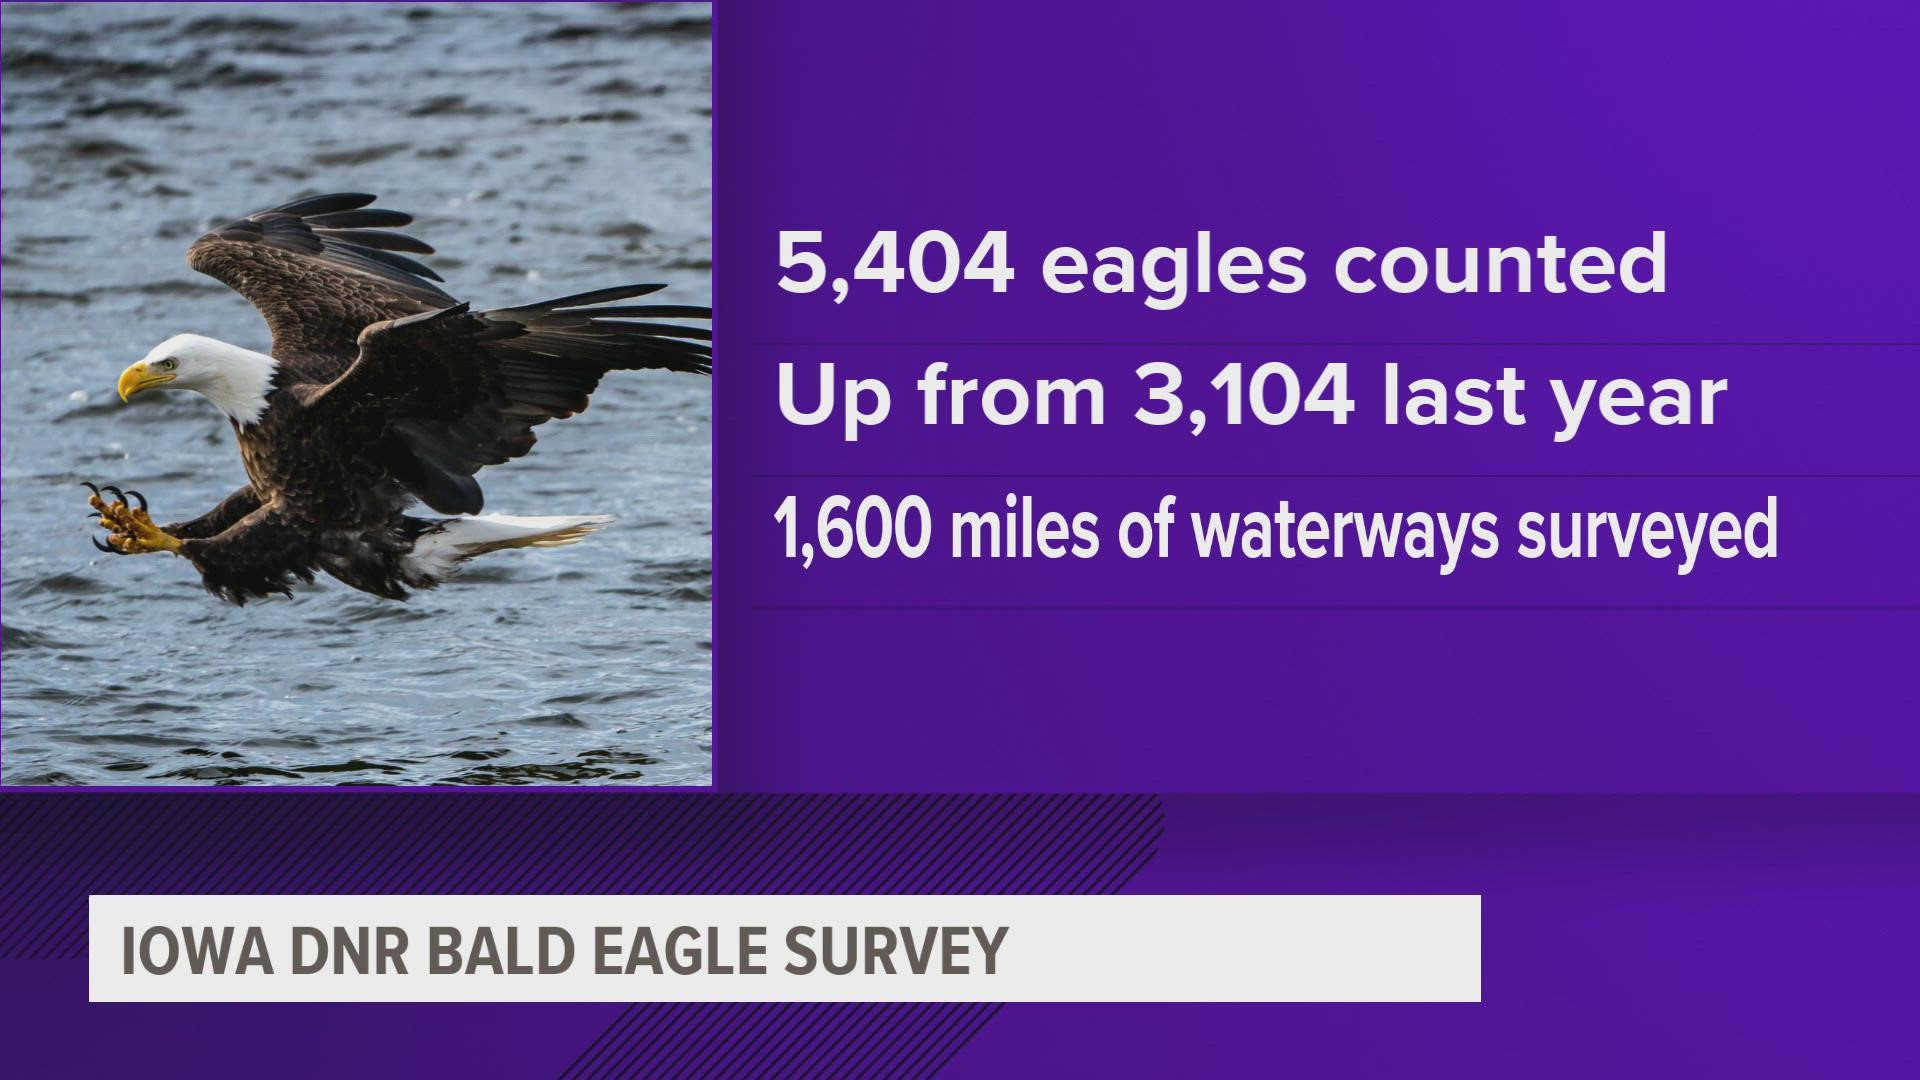 The DNR counted 5,404 bald eagles across the state, up from 3,104 last year.